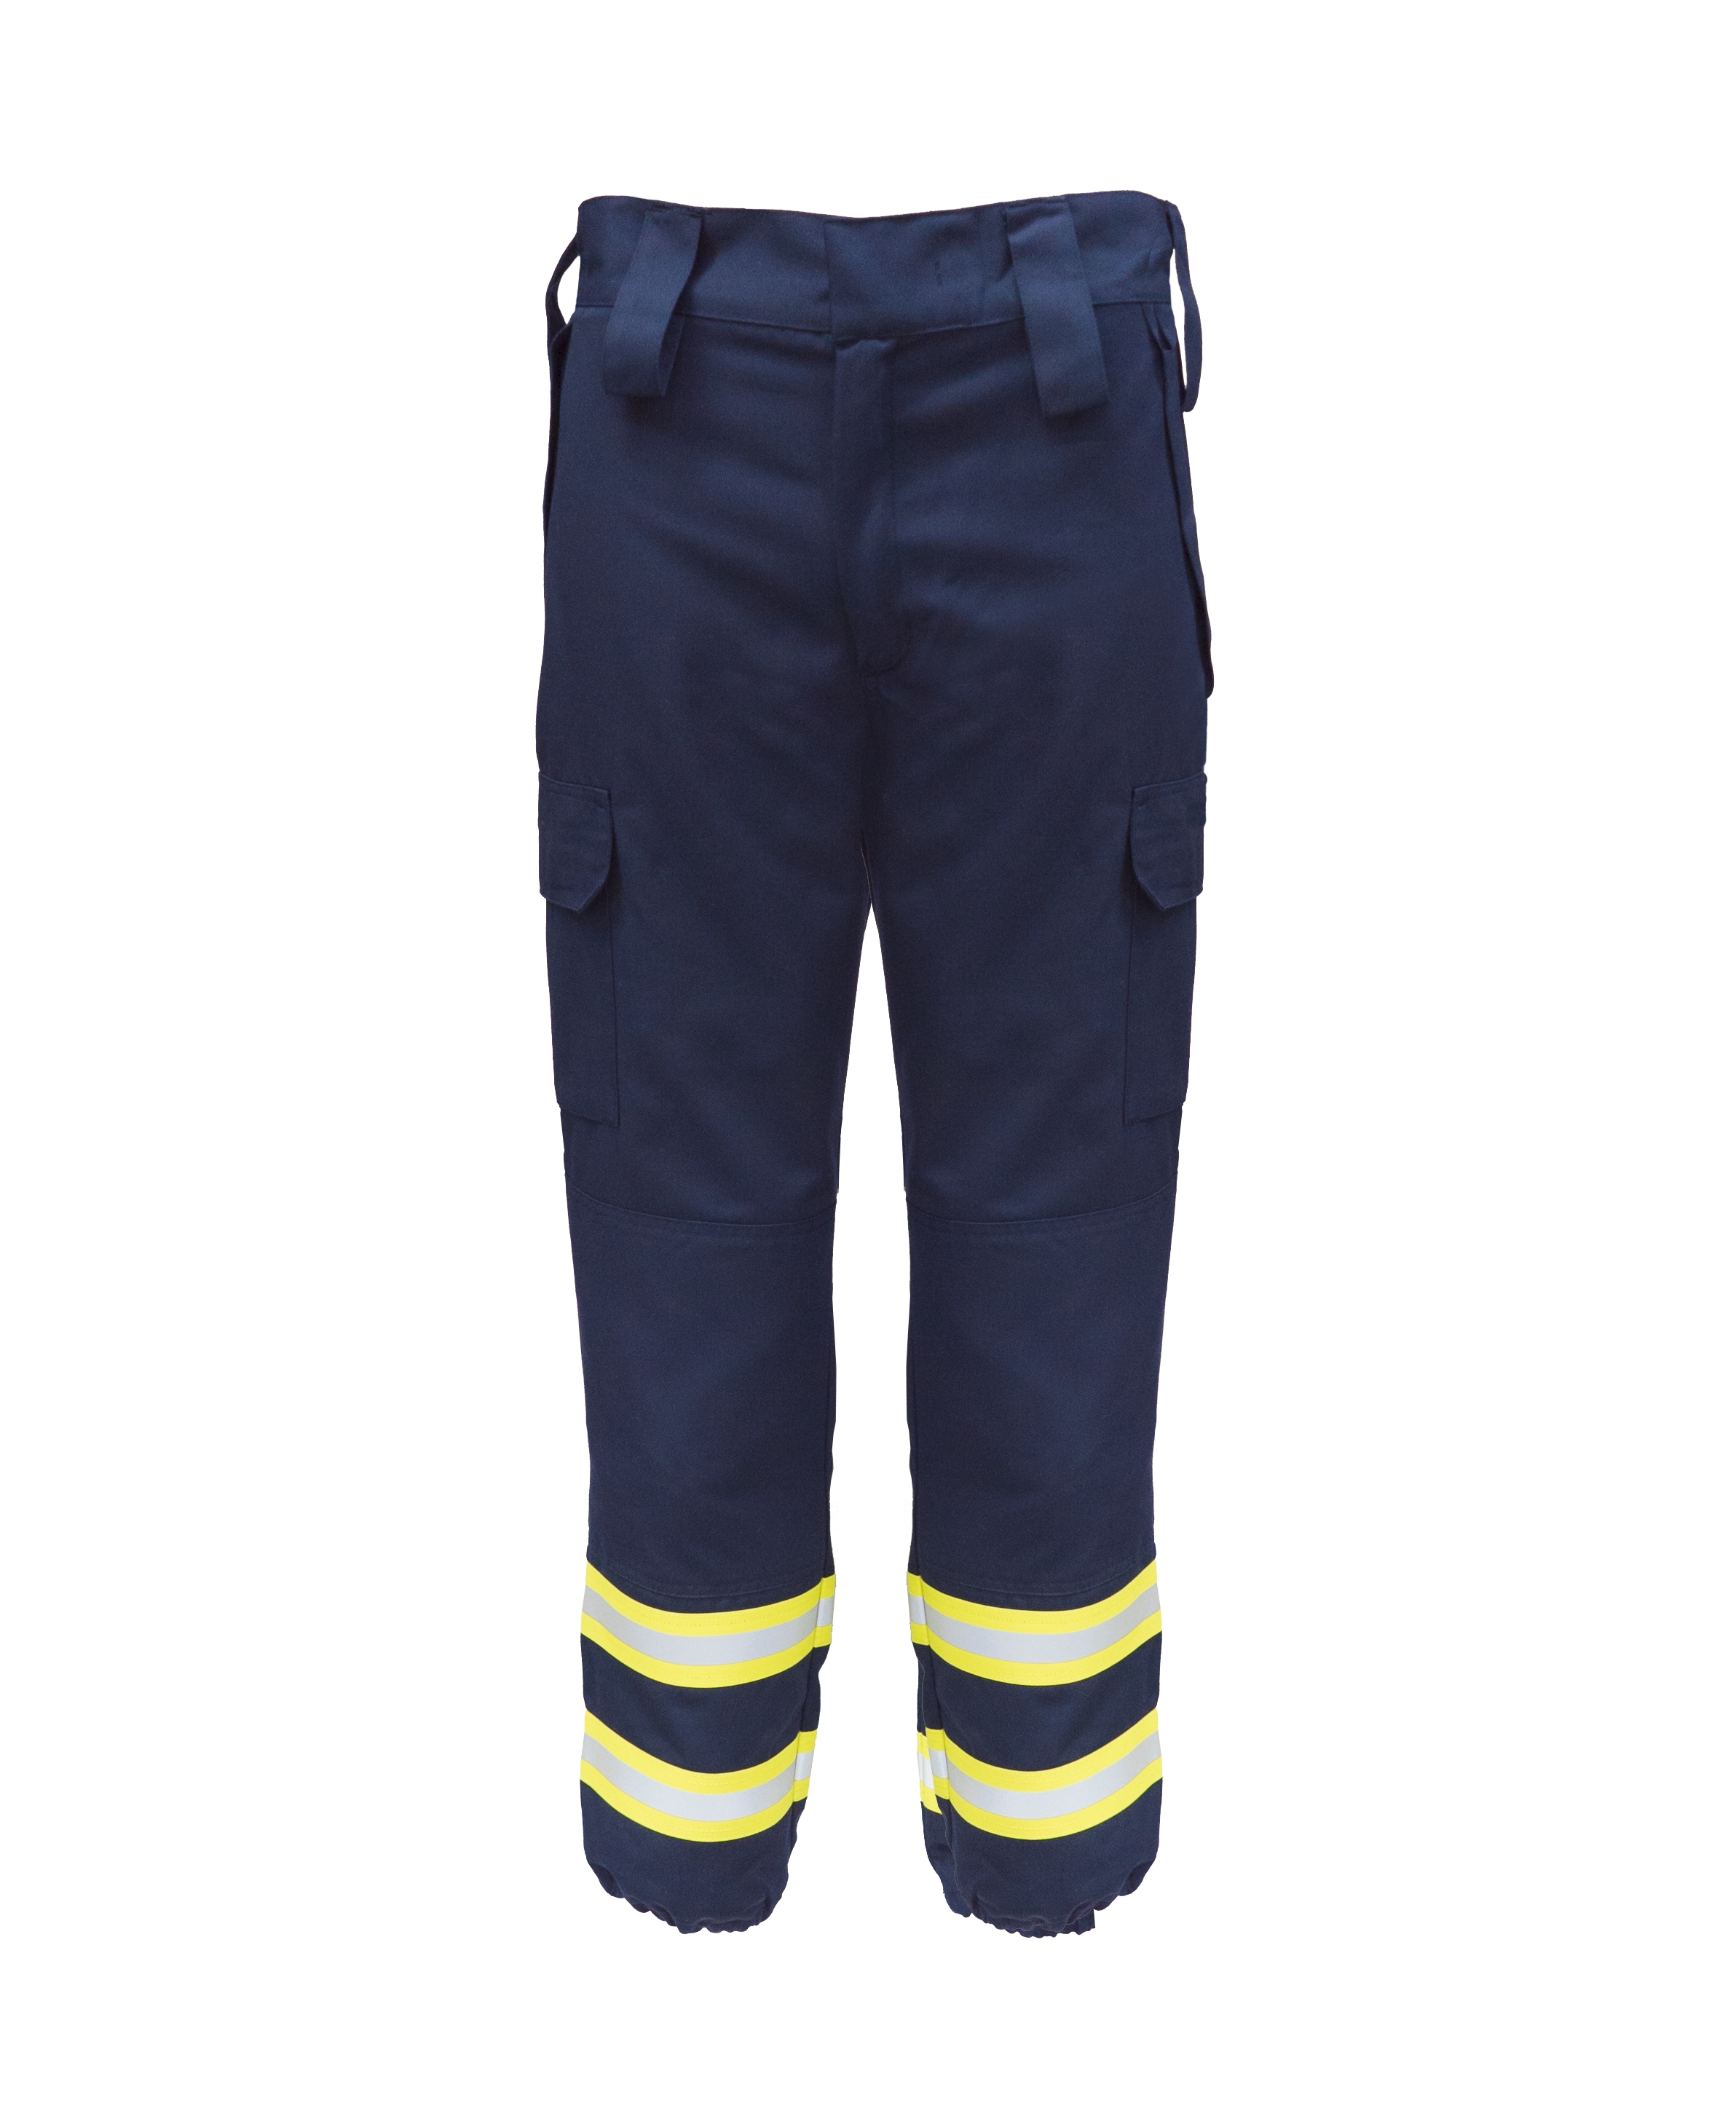 Firefighter pant Portugal  1